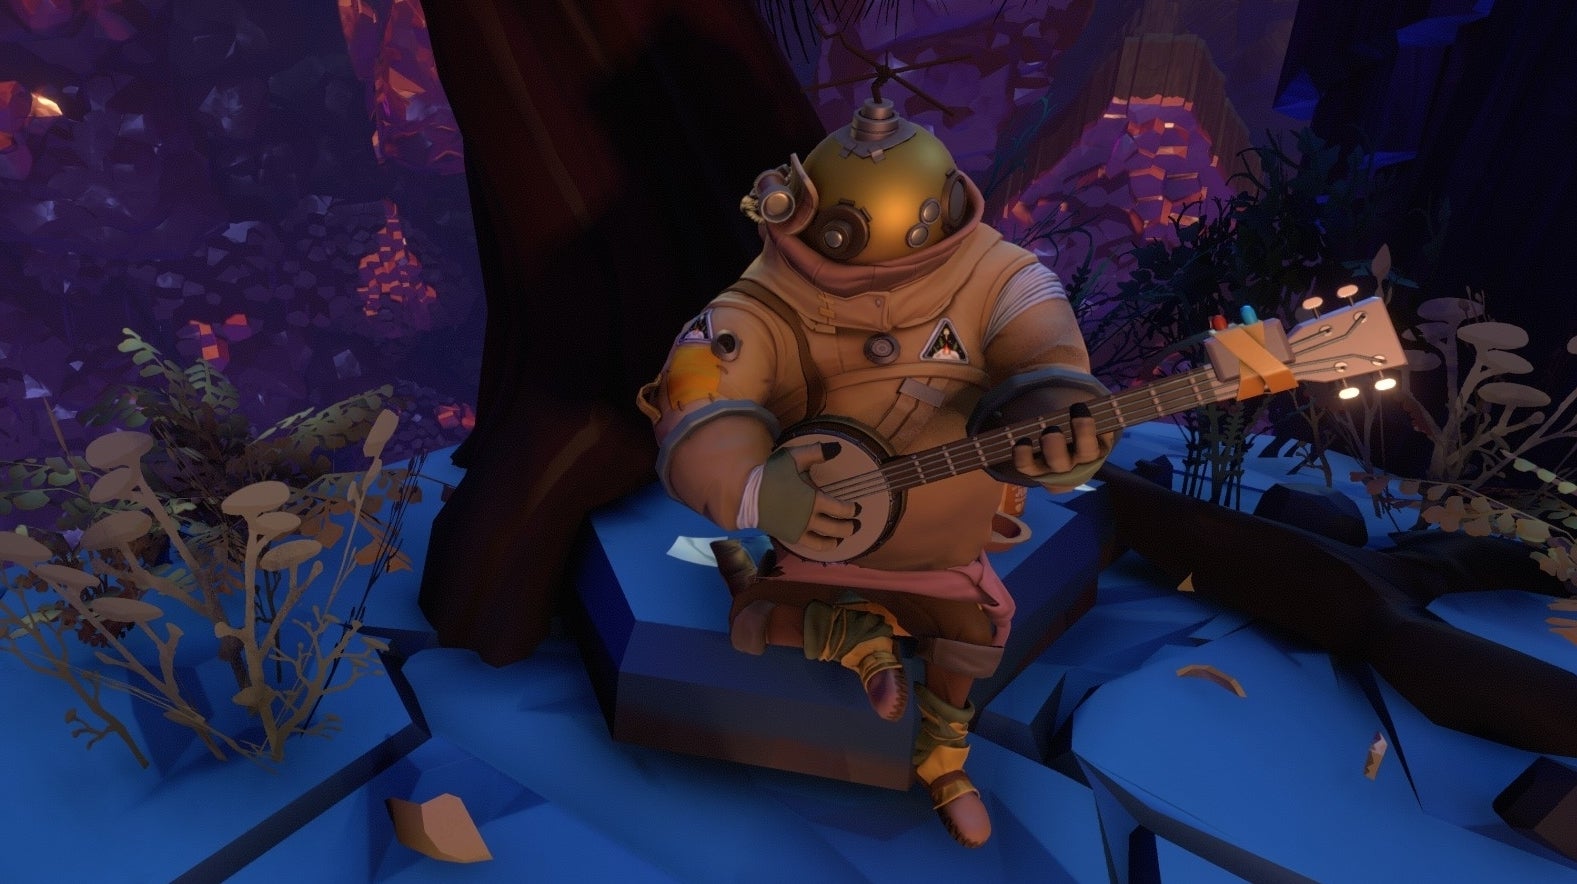 Image for Eurogamer's game of the year 2019 is Outer Wilds